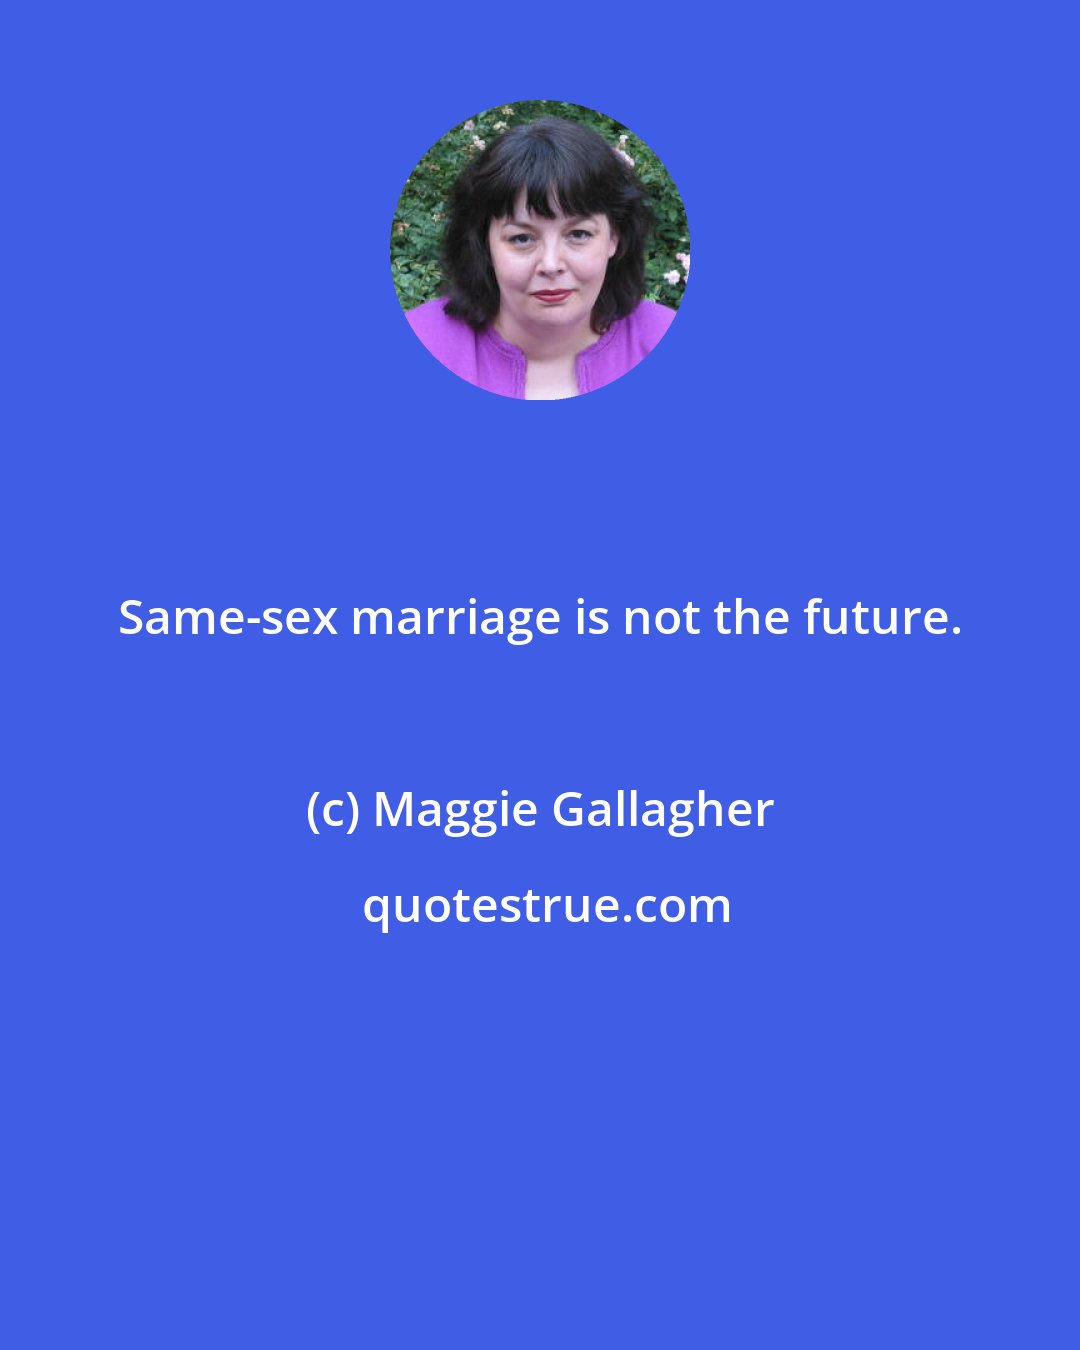 Maggie Gallagher: Same-sex marriage is not the future.